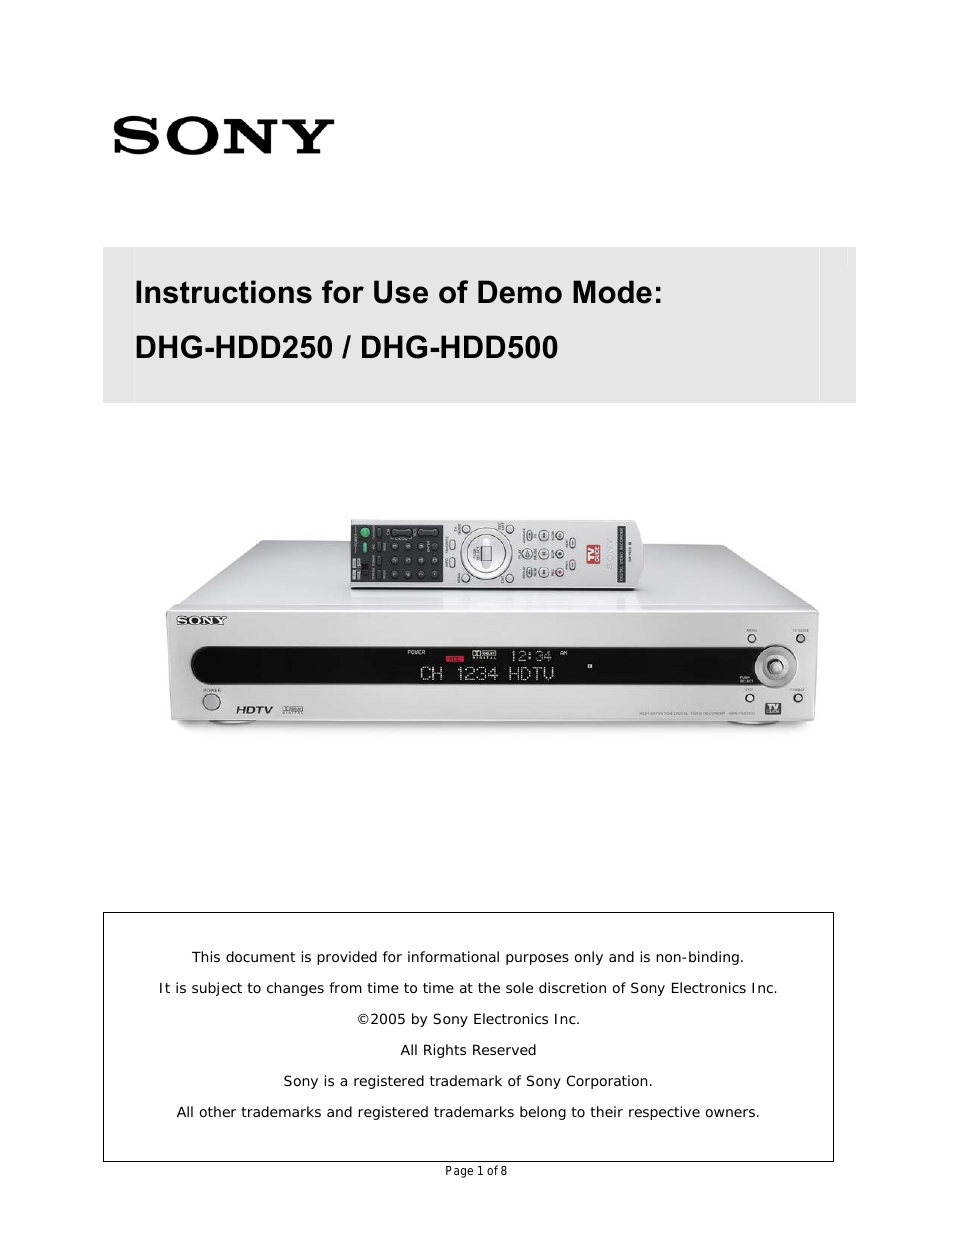 DHG-HDD250